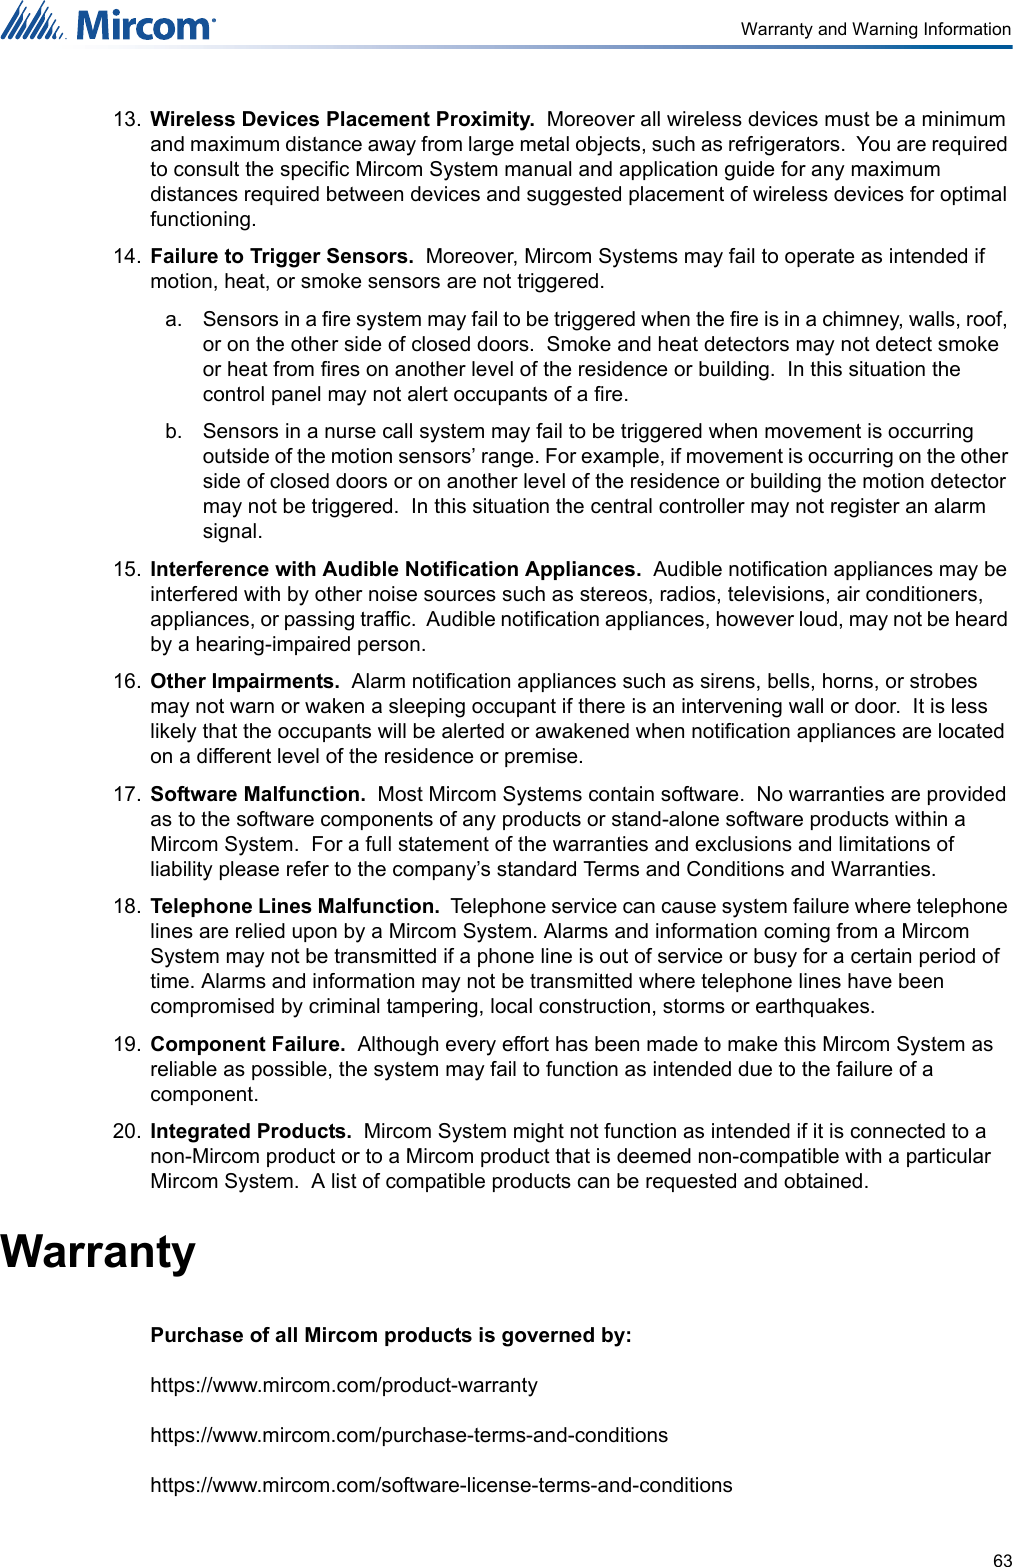 63Warranty and Warning Information13. Wireless Devices Placement Proximity.  Moreover all wireless devices must be a minimum and maximum distance away from large metal objects, such as refrigerators.  You are required to consult the specific Mircom System manual and application guide for any maximum distances required between devices and suggested placement of wireless devices for optimal functioning.  14. Failure to Trigger Sensors.  Moreover, Mircom Systems may fail to operate as intended if motion, heat, or smoke sensors are not triggered.  a. Sensors in a fire system may fail to be triggered when the fire is in a chimney, walls, roof, or on the other side of closed doors.  Smoke and heat detectors may not detect smoke or heat from fires on another level of the residence or building.  In this situation the control panel may not alert occupants of a fire.  b. Sensors in a nurse call system may fail to be triggered when movement is occurring outside of the motion sensors’ range. For example, if movement is occurring on the other side of closed doors or on another level of the residence or building the motion detector may not be triggered.  In this situation the central controller may not register an alarm signal.15. Interference with Audible Notification Appliances.  Audible notification appliances may be interfered with by other noise sources such as stereos, radios, televisions, air conditioners, appliances, or passing traffic.  Audible notification appliances, however loud, may not be heard by a hearing-impaired person.16. Other Impairments.  Alarm notification appliances such as sirens, bells, horns, or strobes may not warn or waken a sleeping occupant if there is an intervening wall or door.  It is less likely that the occupants will be alerted or awakened when notification appliances are located on a different level of the residence or premise.17. Software Malfunction.  Most Mircom Systems contain software.  No warranties are provided as to the software components of any products or stand-alone software products within a Mircom System.  For a full statement of the warranties and exclusions and limitations of liability please refer to the company’s standard Terms and Conditions and Warranties.  18. Telephone Lines Malfunction.  Telephone service can cause system failure where telephone lines are relied upon by a Mircom System. Alarms and information coming from a Mircom System may not be transmitted if a phone line is out of service or busy for a certain period of time. Alarms and information may not be transmitted where telephone lines have been compromised by criminal tampering, local construction, storms or earthquakes.19. Component Failure.  Although every effort has been made to make this Mircom System as reliable as possible, the system may fail to function as intended due to the failure of a component.20. Integrated Products.  Mircom System might not function as intended if it is connected to a non-Mircom product or to a Mircom product that is deemed non-compatible with a particular Mircom System.  A list of compatible products can be requested and obtained.WarrantyPurchase of all Mircom products is governed by:https://www.mircom.com/product-warrantyhttps://www.mircom.com/purchase-terms-and-conditionshttps://www.mircom.com/software-license-terms-and-conditions